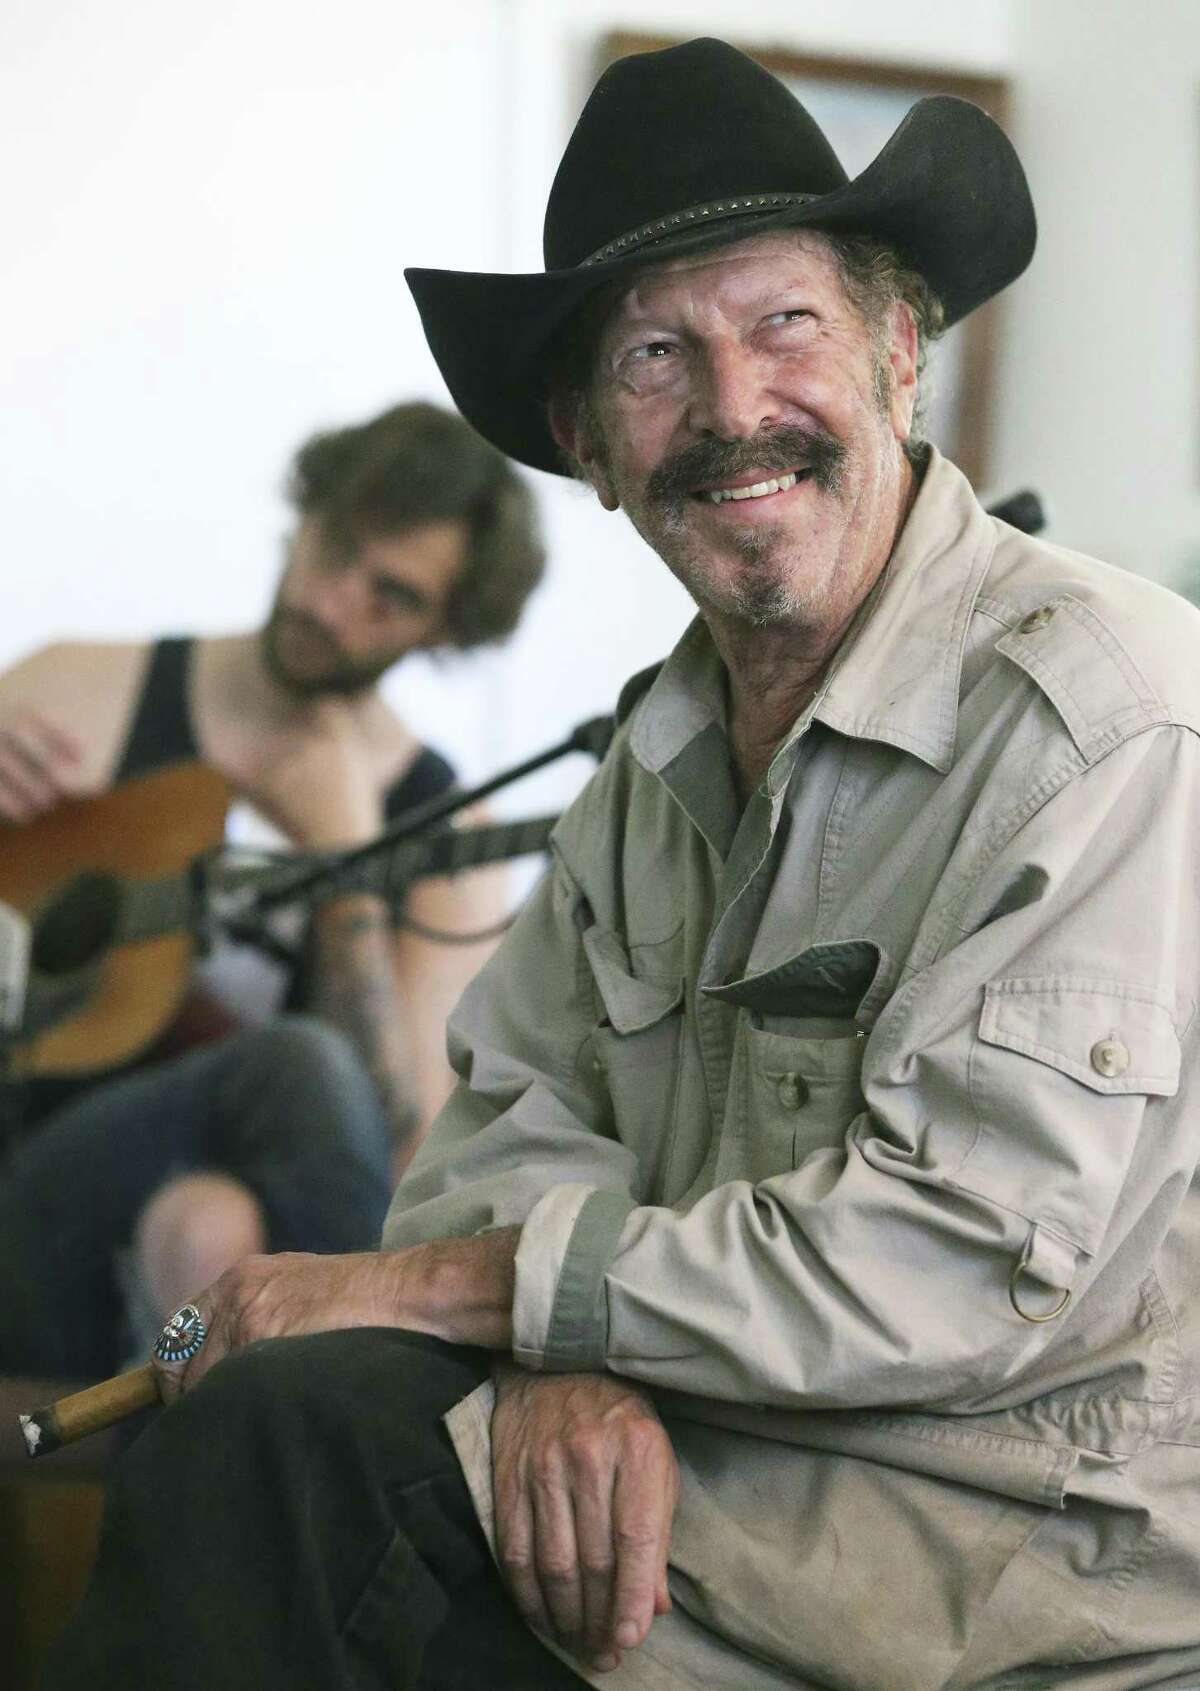 The songs on Kinky Friedman’s new album, “Circus of Life,” reflect a different side of the musician, writer and sometime politician, who’s known for his comic personna.